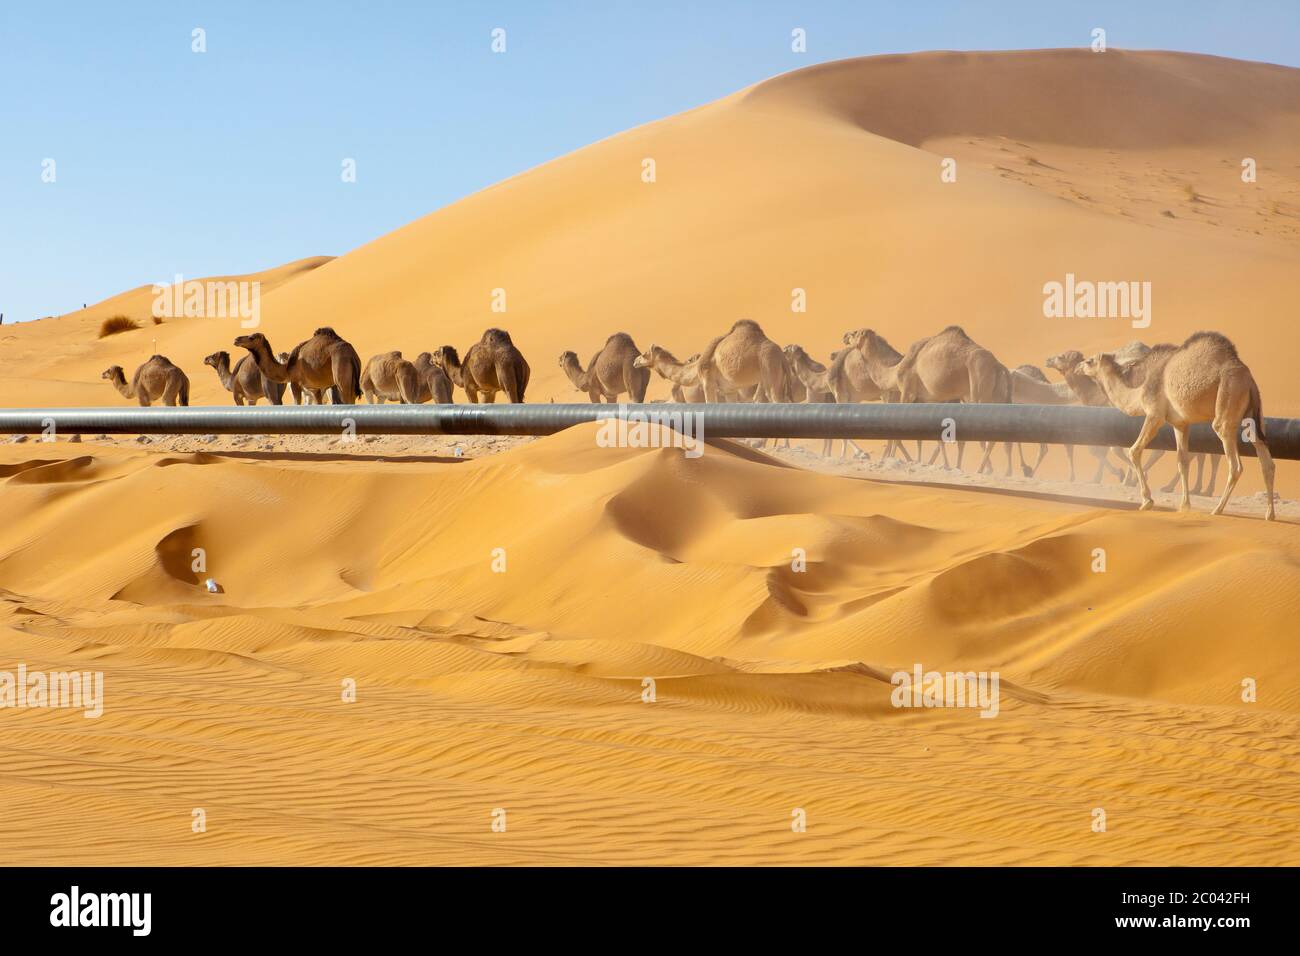 Camels walking on a track built by a oil exploration company beside an oil export pipeline the Sahara desert, North Africa. Stock Photo